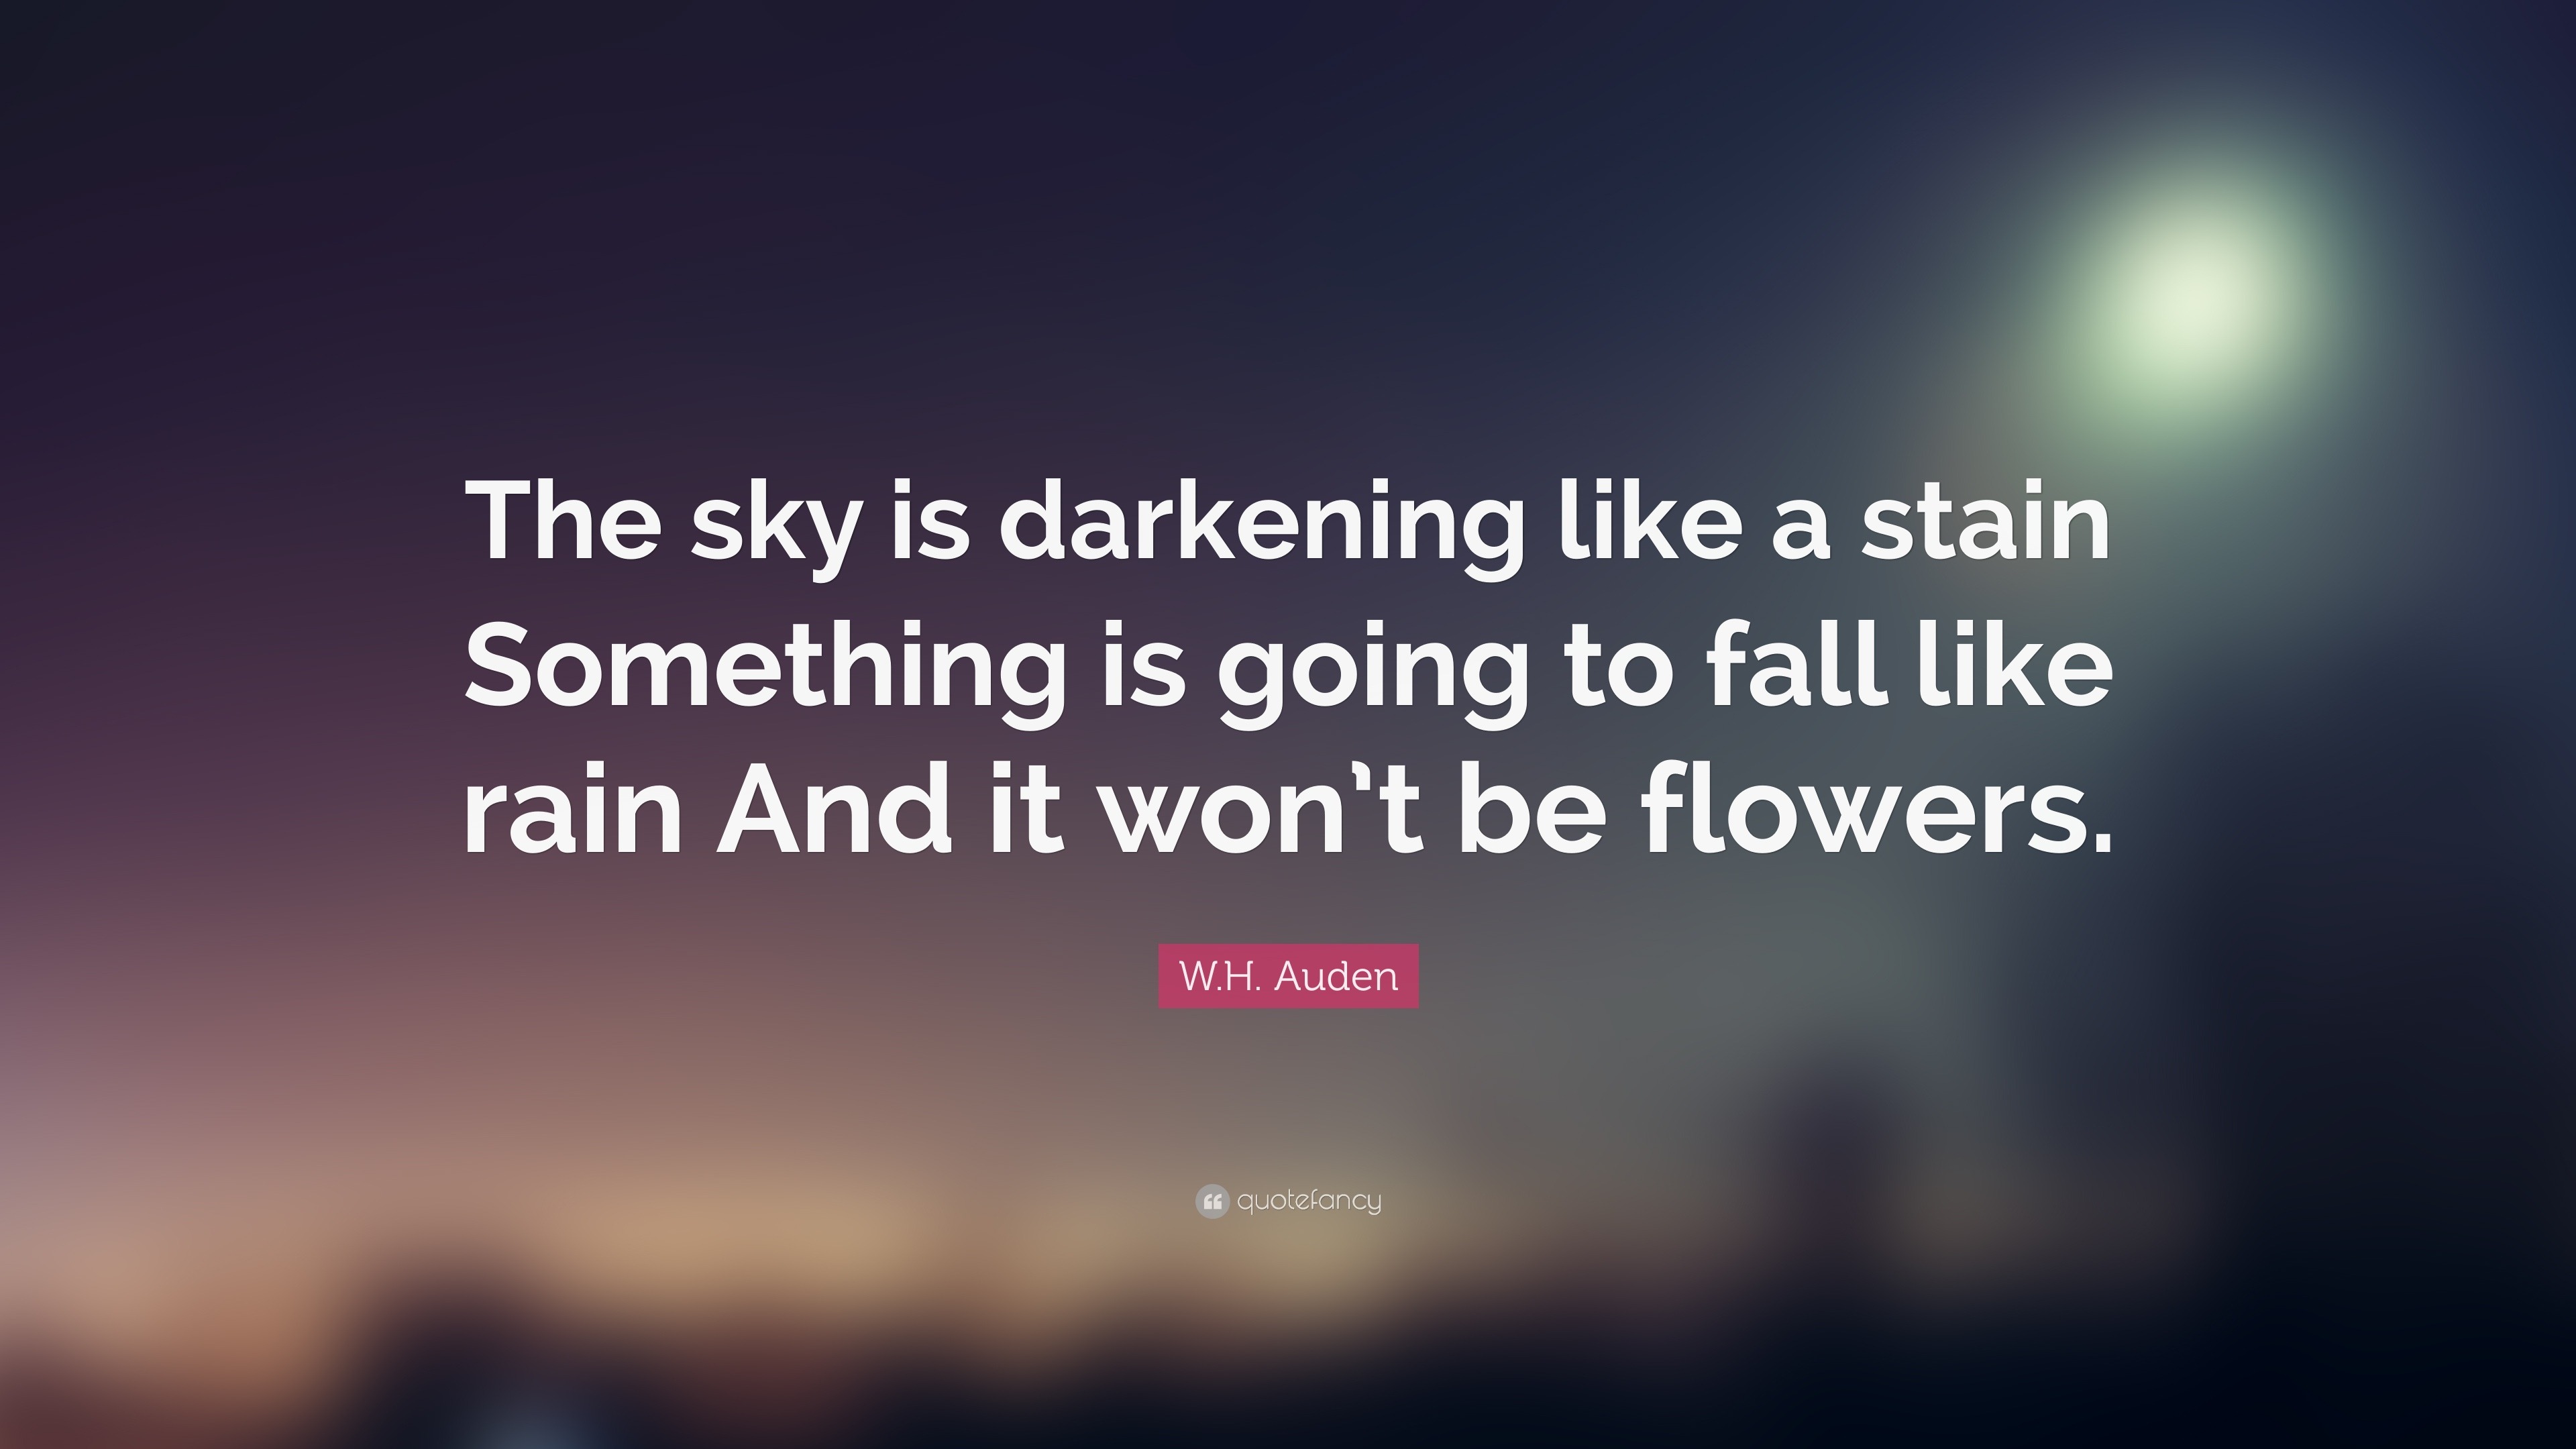 W.H. Auden Quote: “The sky is darkening like a stain Something is